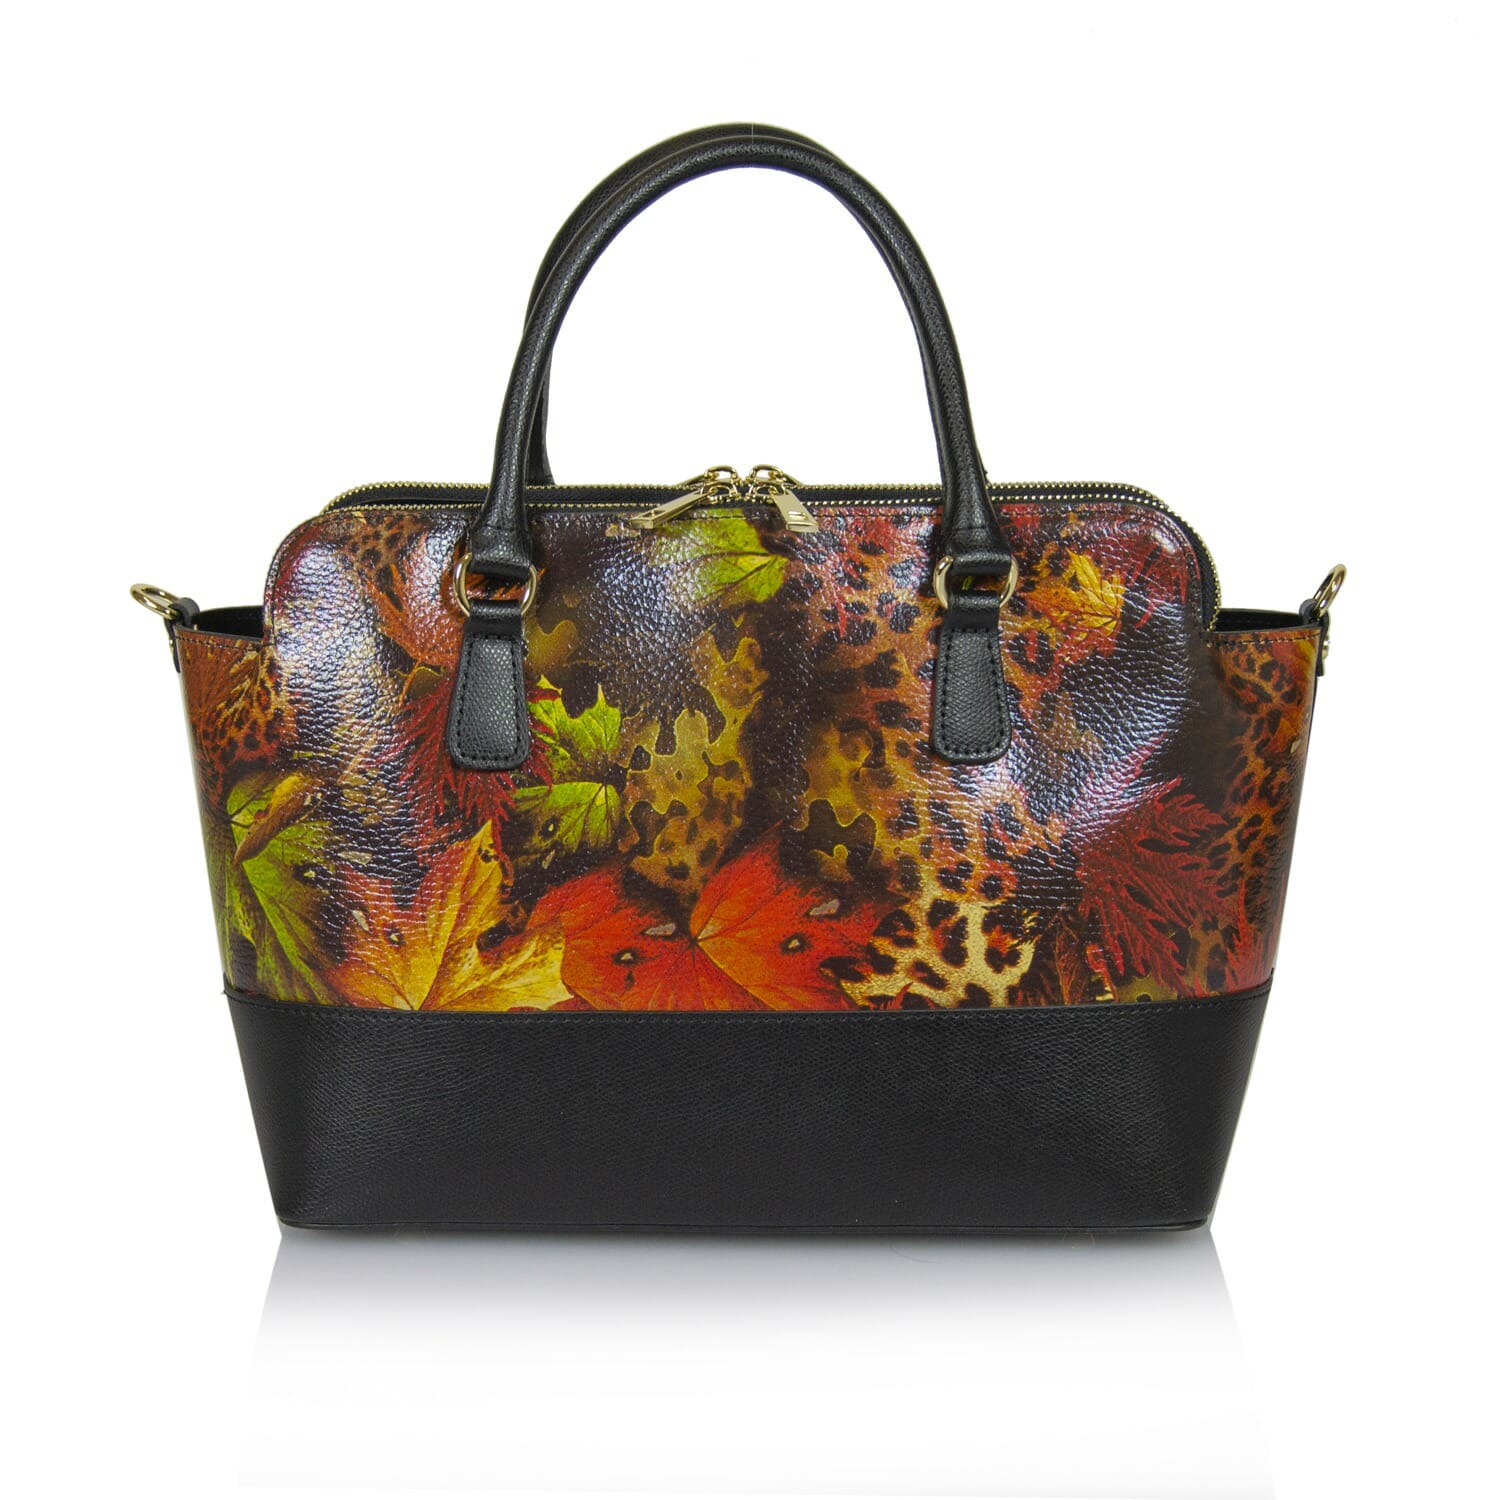 Tosca Large Shopper Genuine Leather Bag with 3 Compartments - PRINT LEAVES